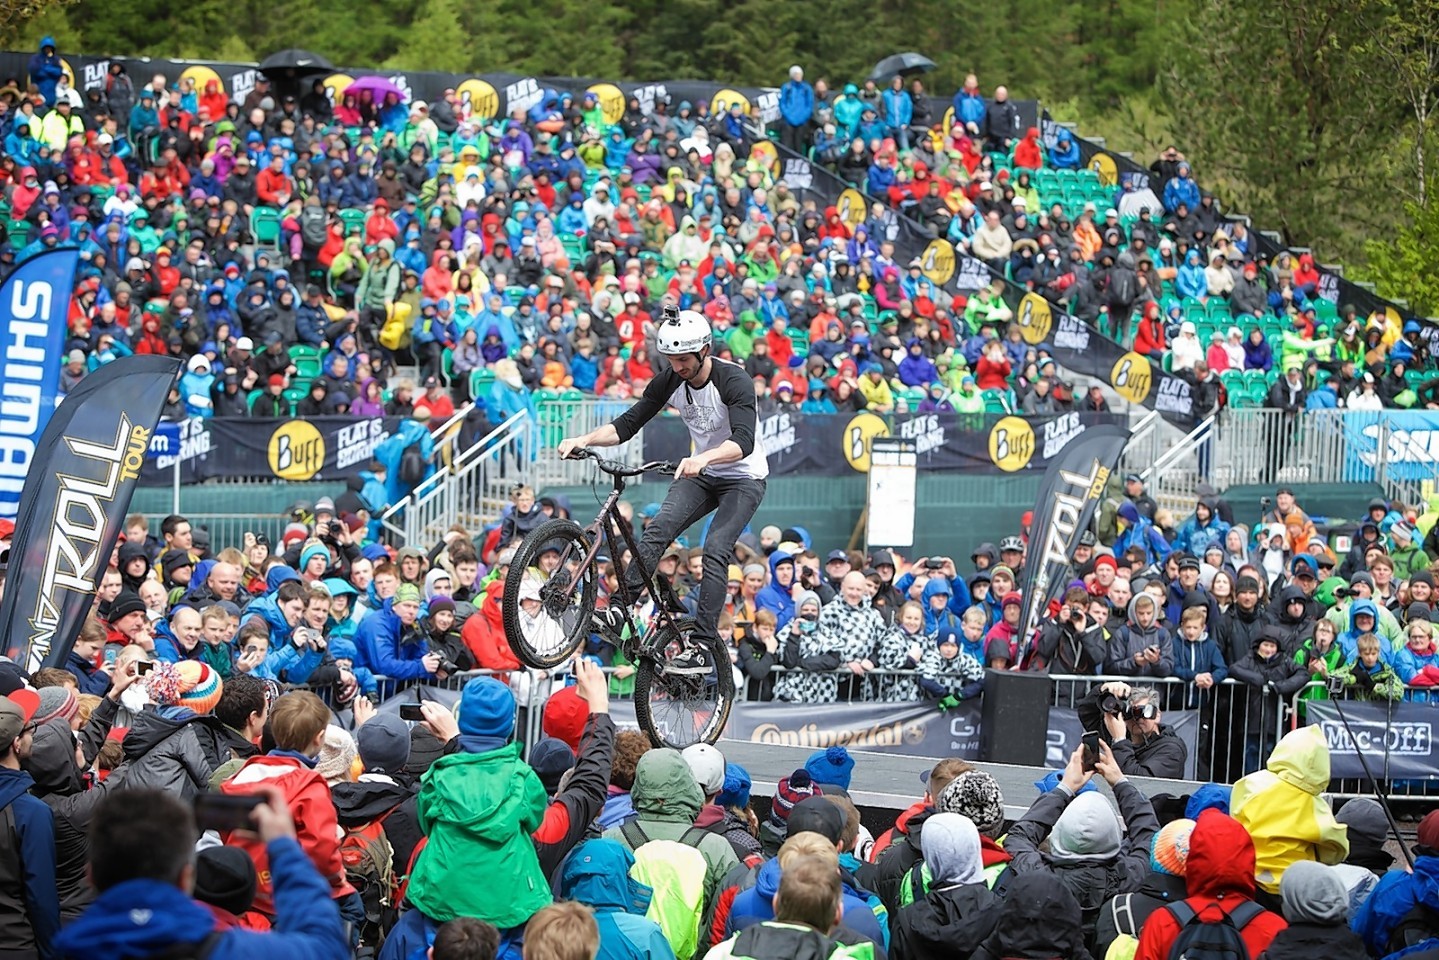 Danny MacAskill and his stunt team wow the crowd